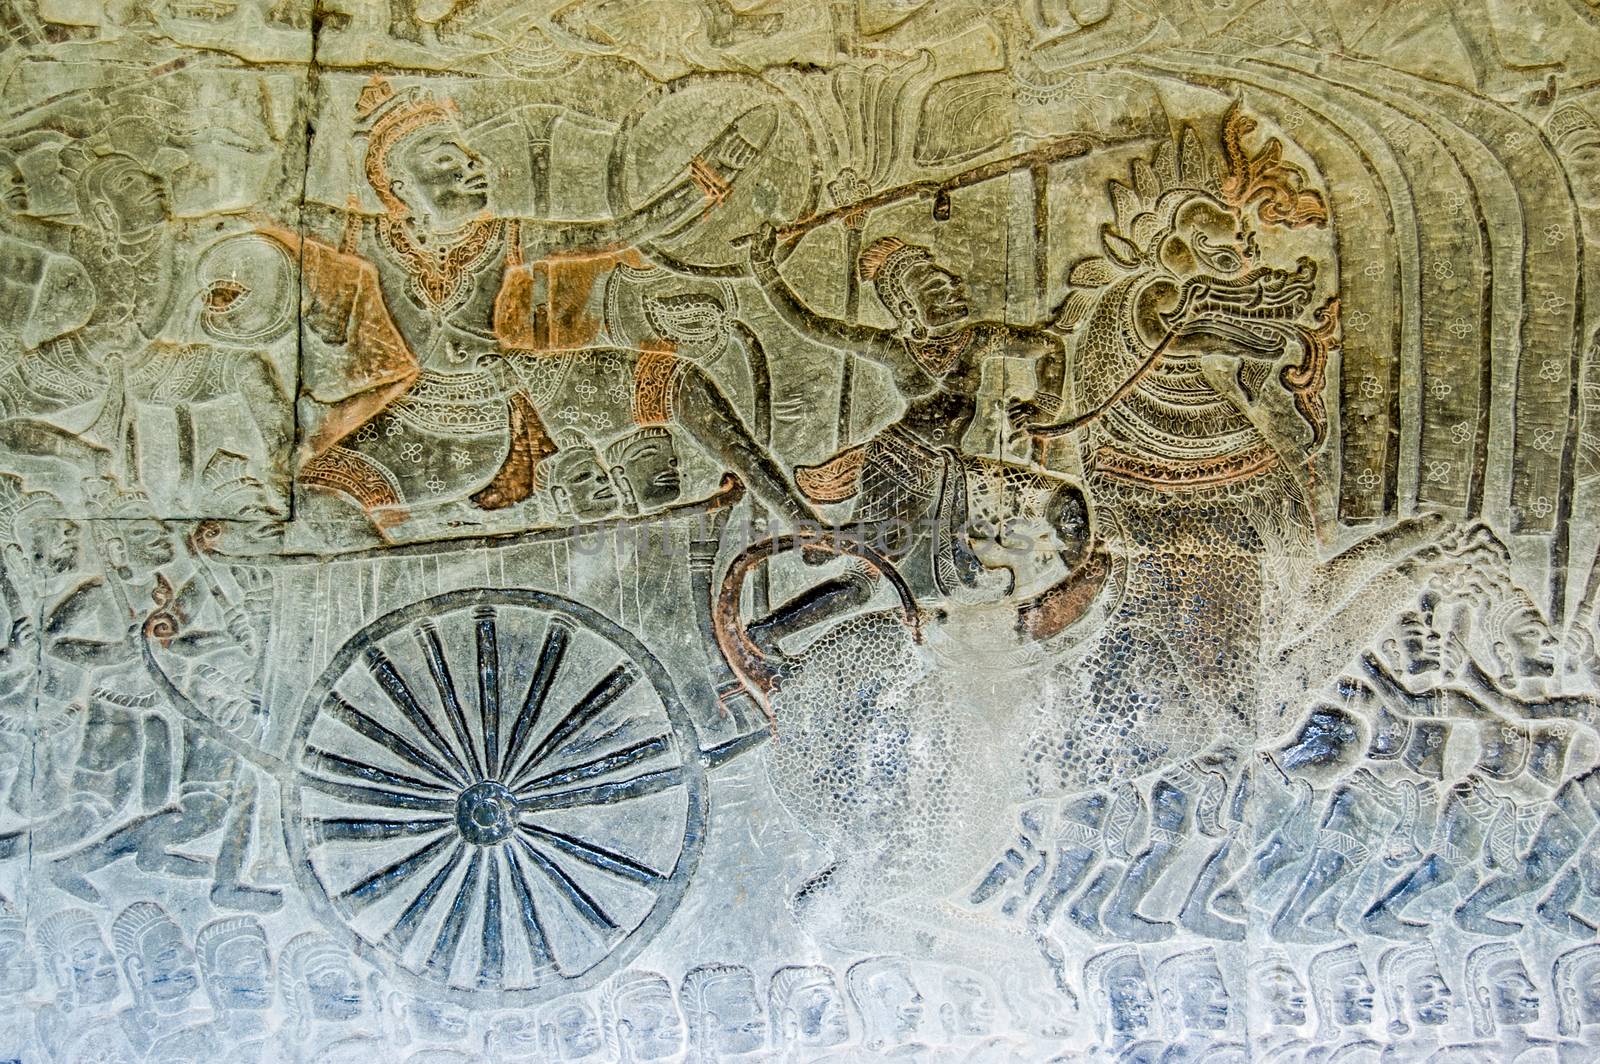 The Hindu god Vishnu on a chariot pulled by an imperial lion going in battle with the demons, or asuras. Ancient Khmer bas relief, Angkor Wat temple, Siem Reap, Cambodia.